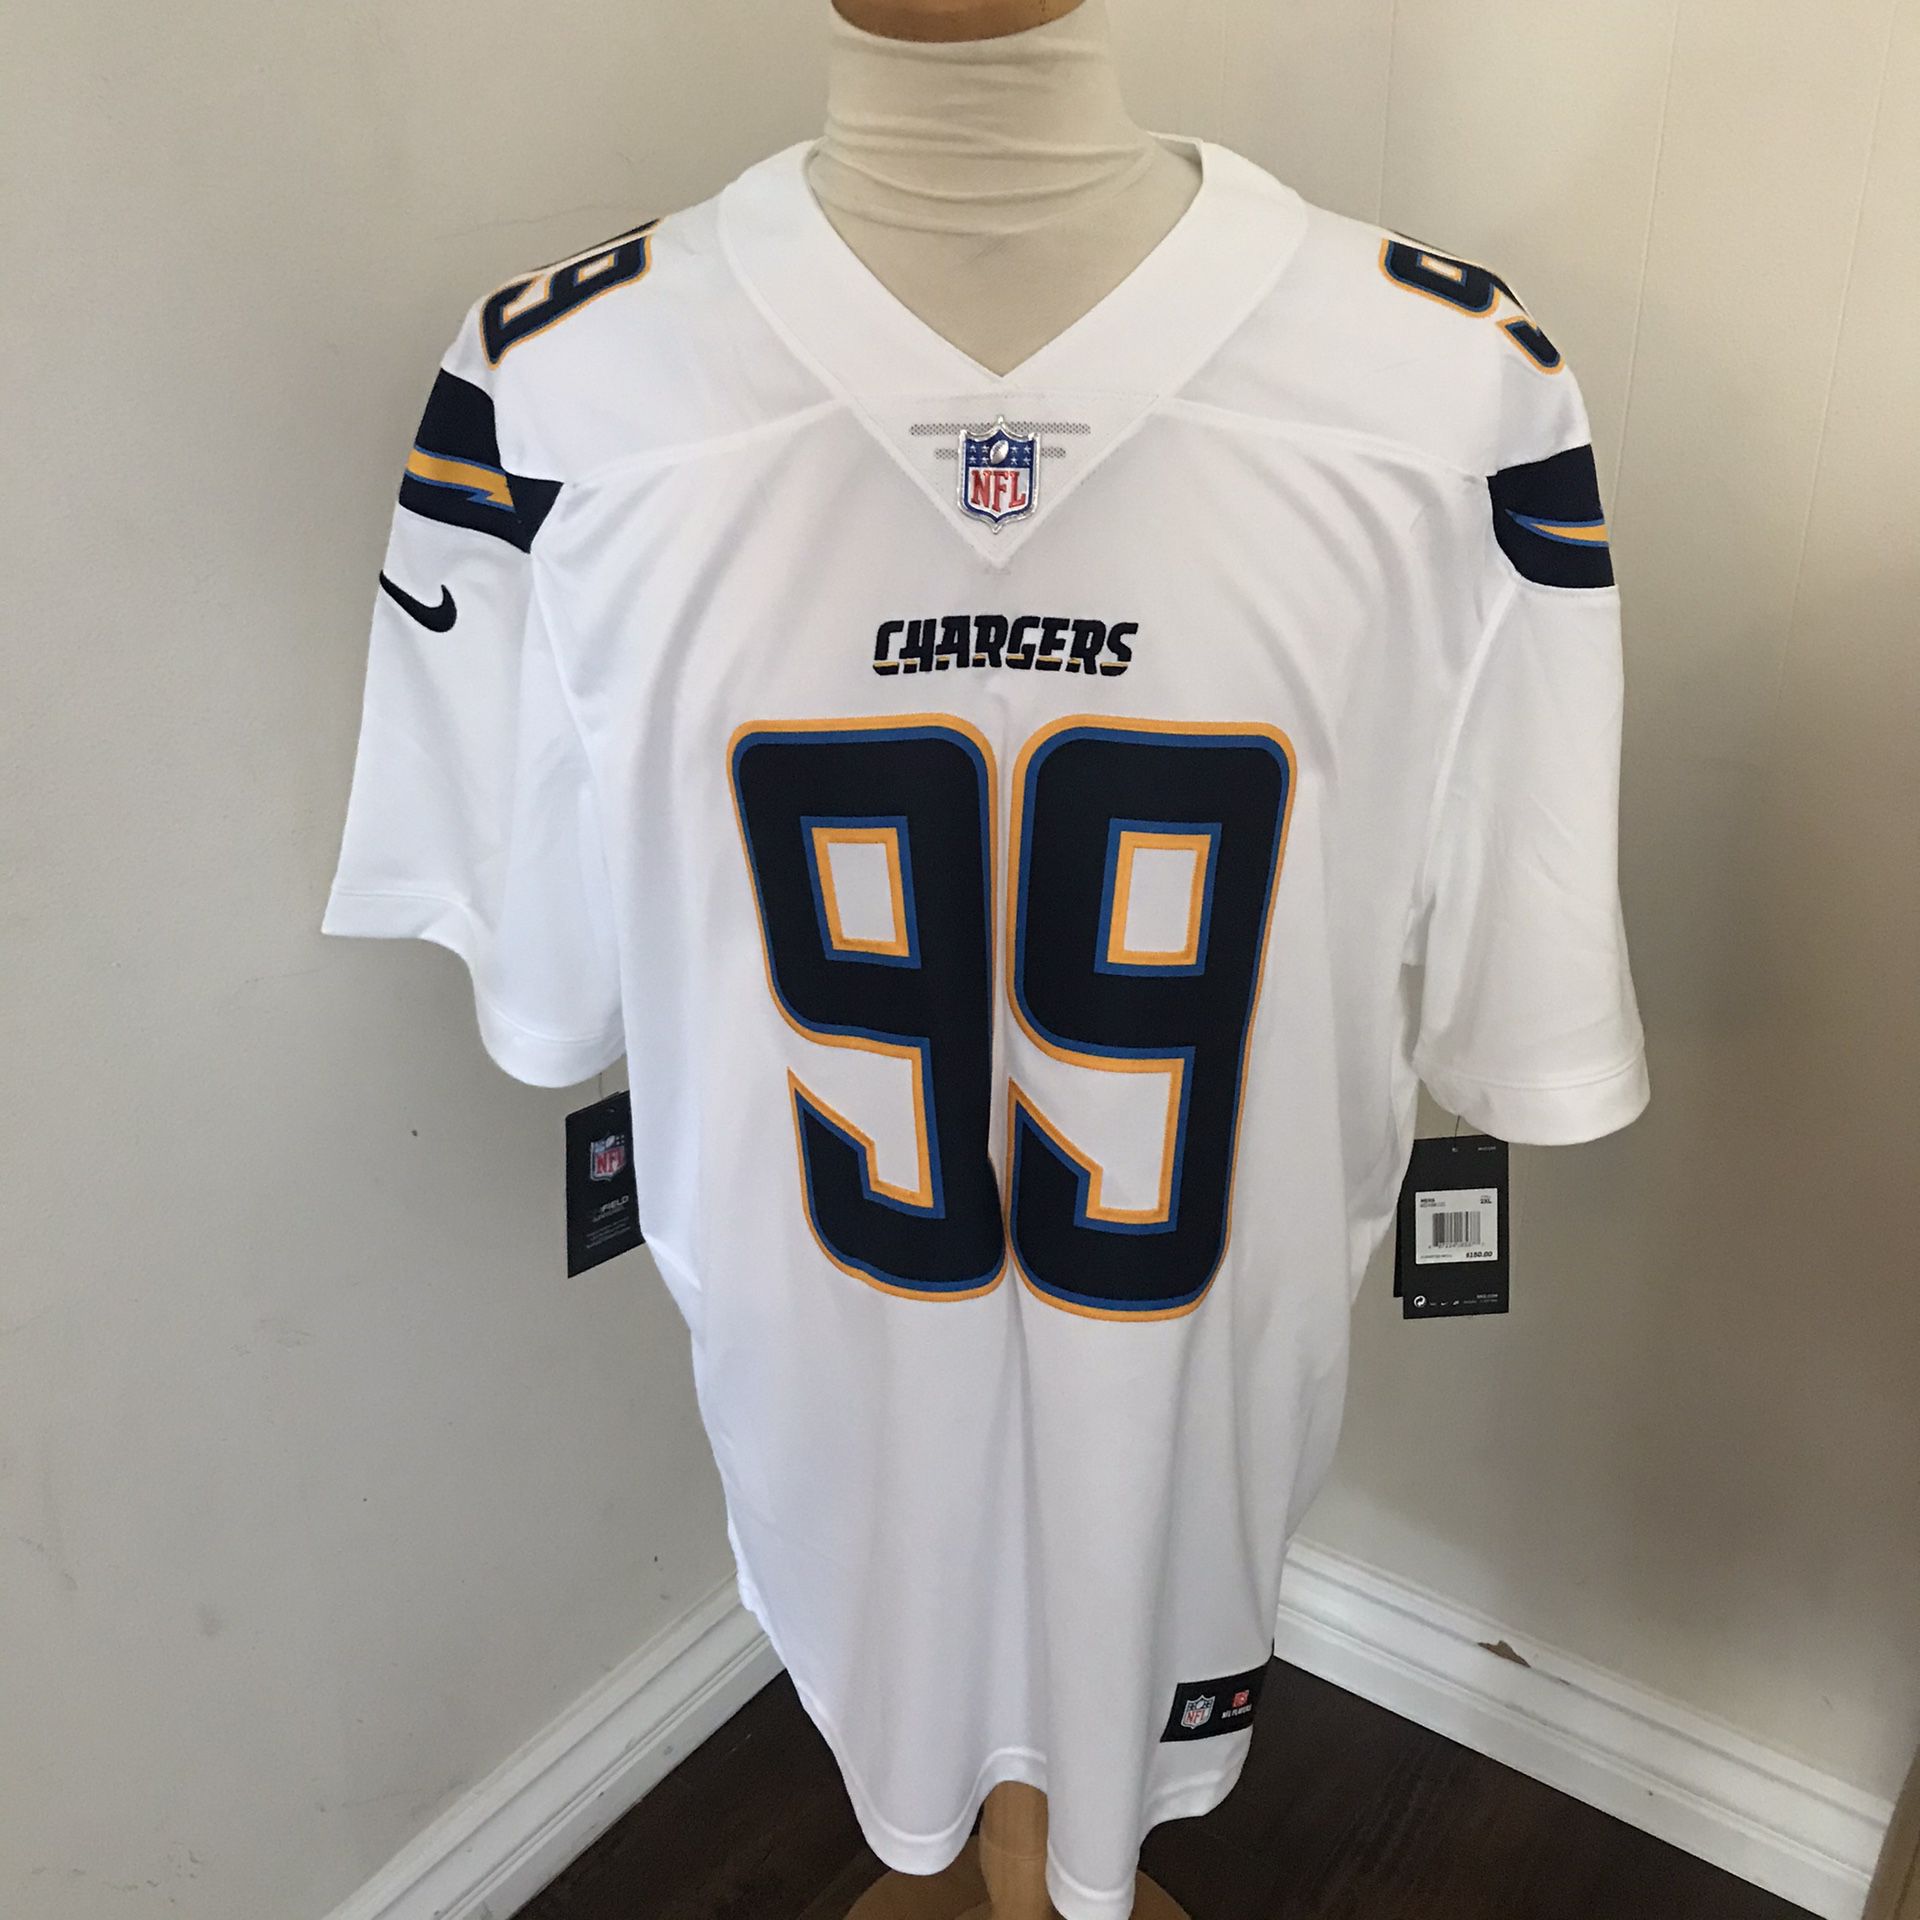 Nike men’s authentic NFL Los Angeles Chargers Joey Bosa color rush sewn away jersey US Size 2XL